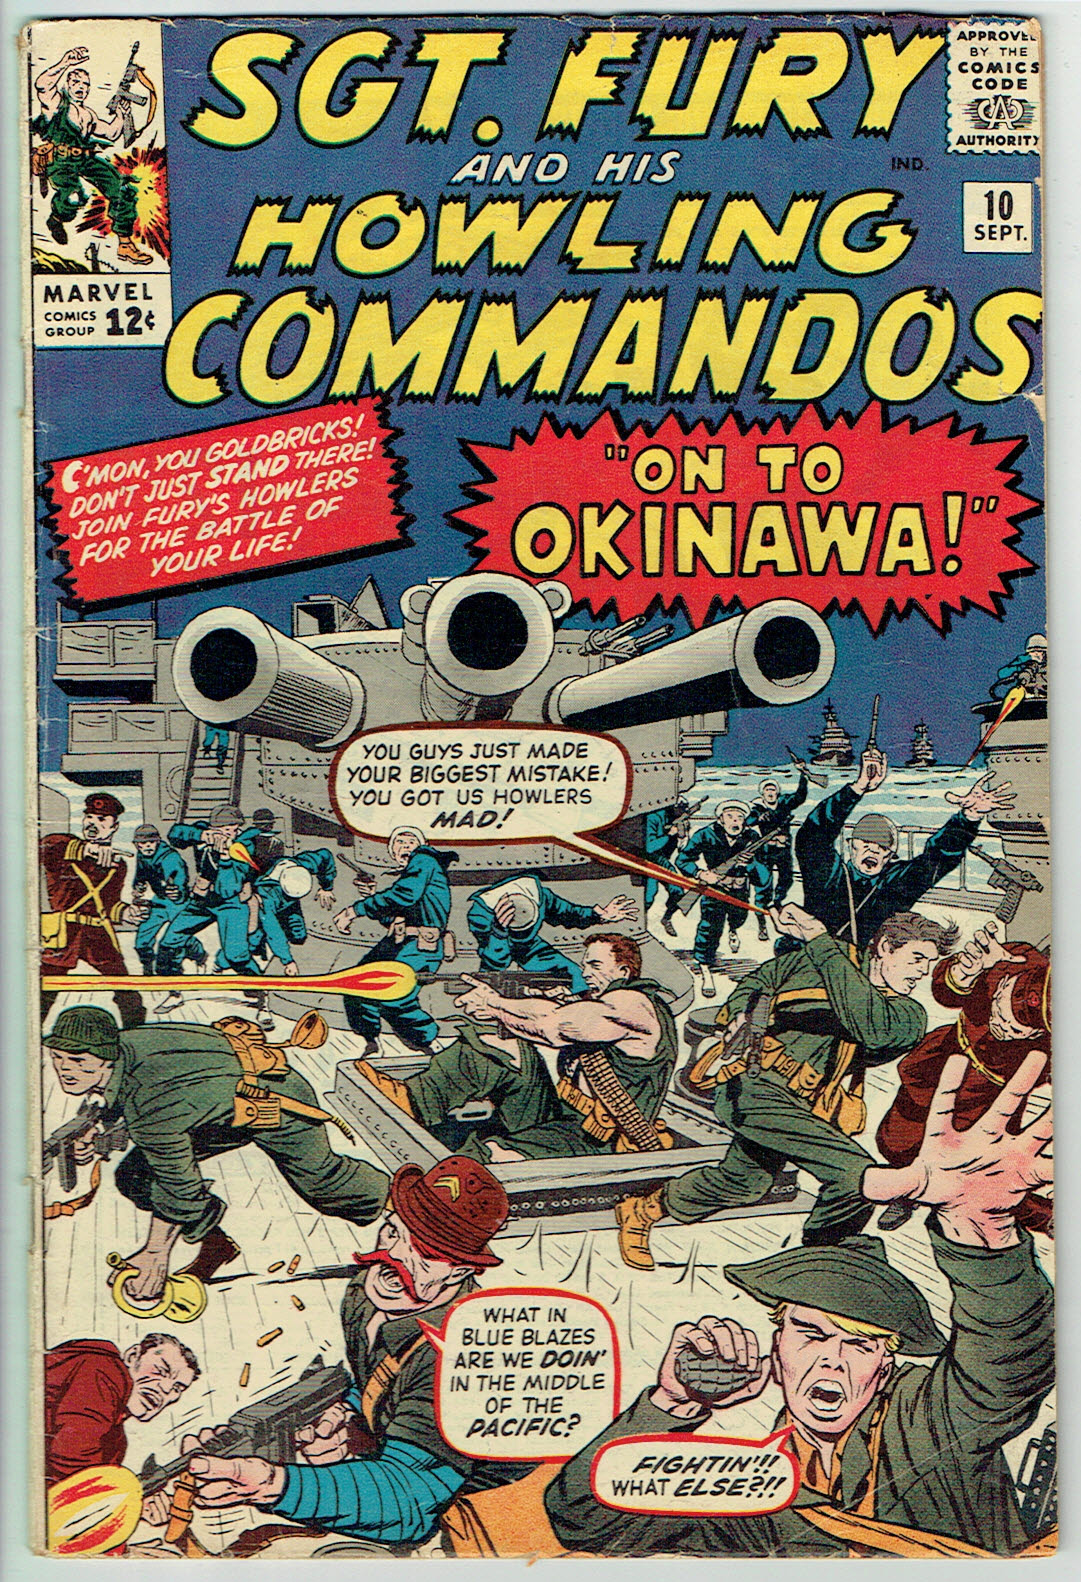 Sgt. Fury and his Howling Commandos  #10